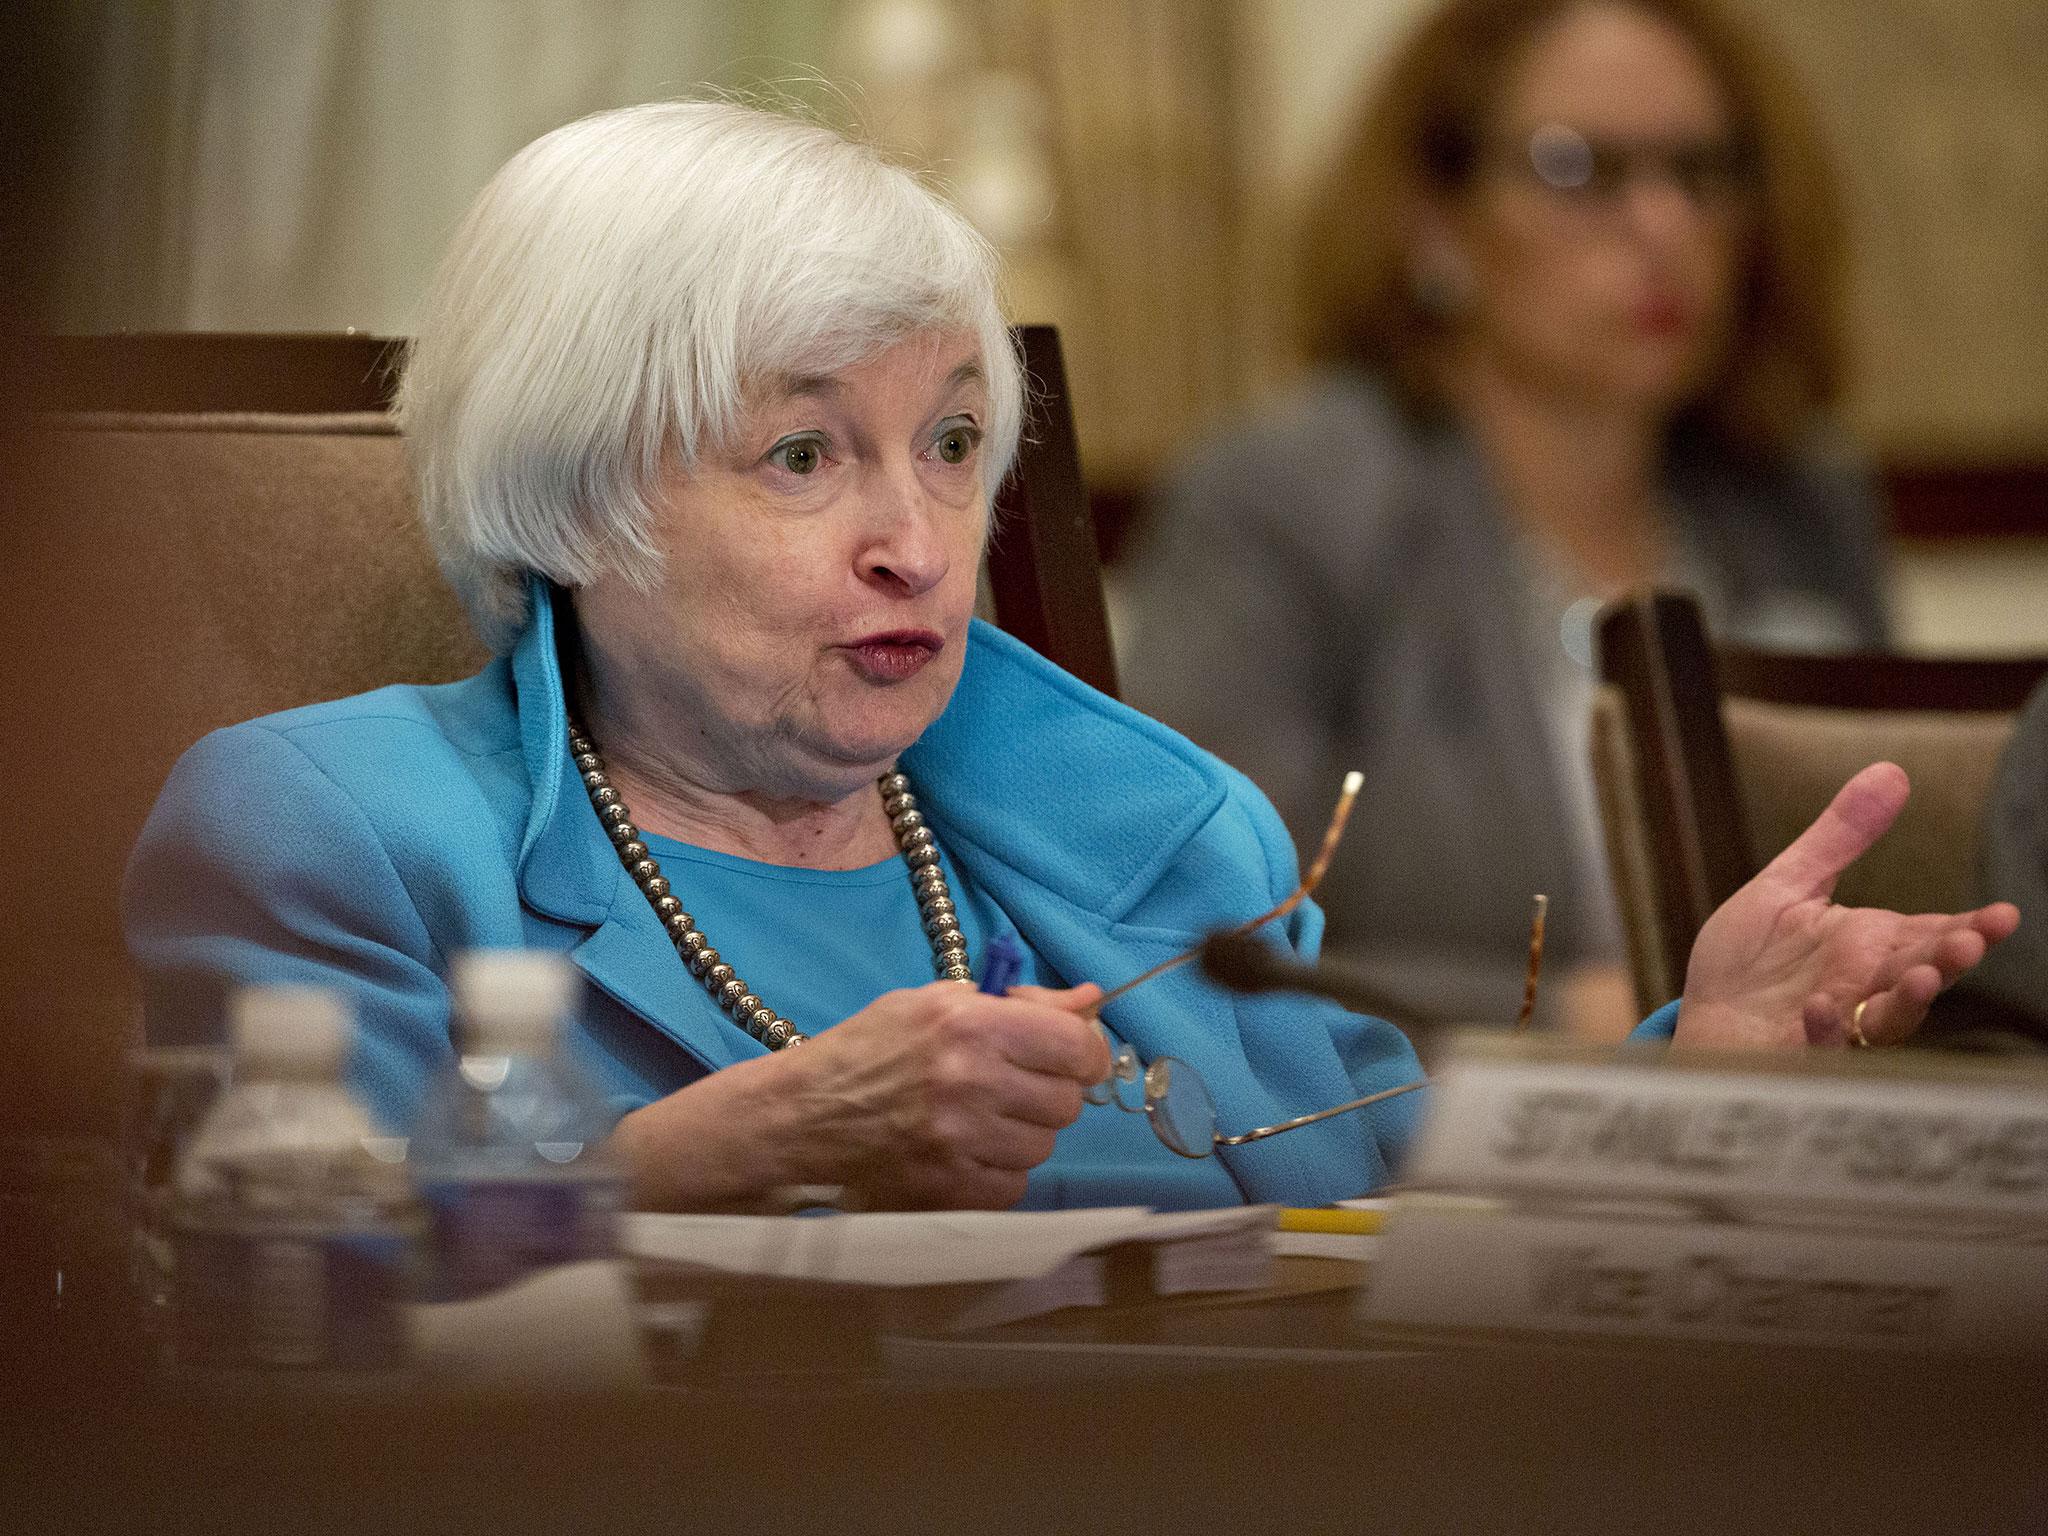 Janet Yellen, Chair of the Federal Reserve, which is expected to put up interest rates later this month